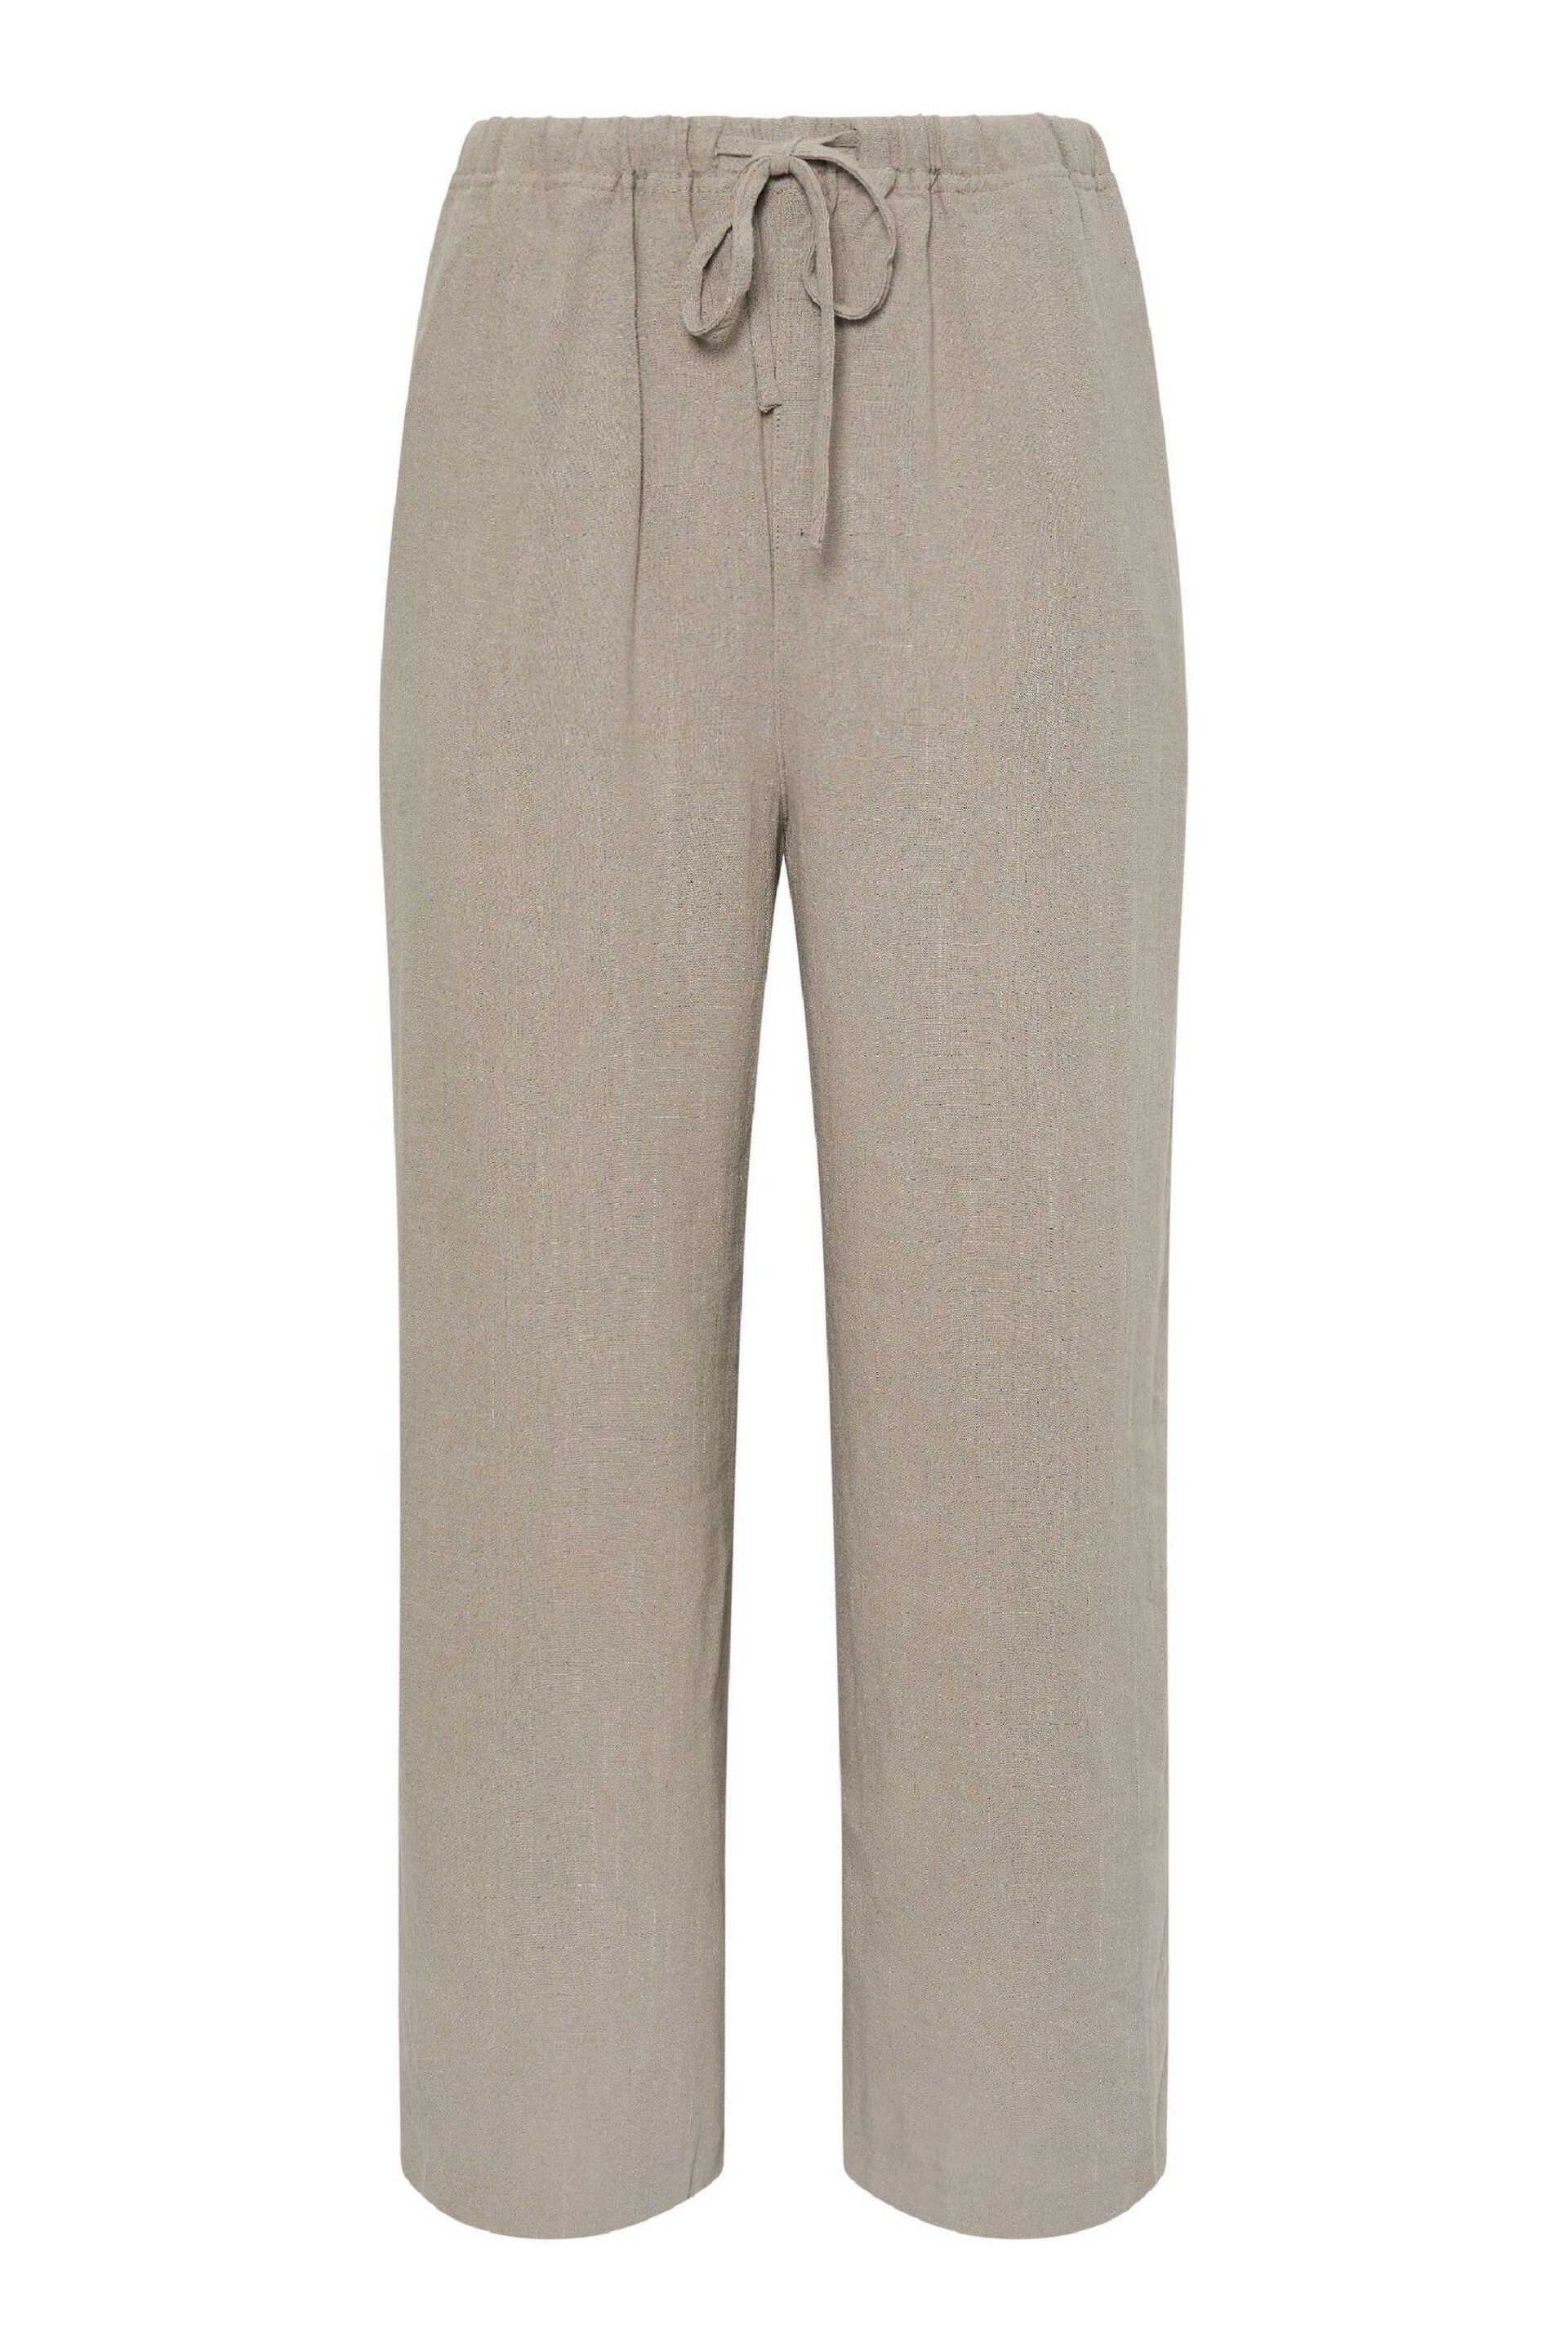 Long Tall Sally Natural Cropped Sand Linen Blend Trousers - Image 5 of 5